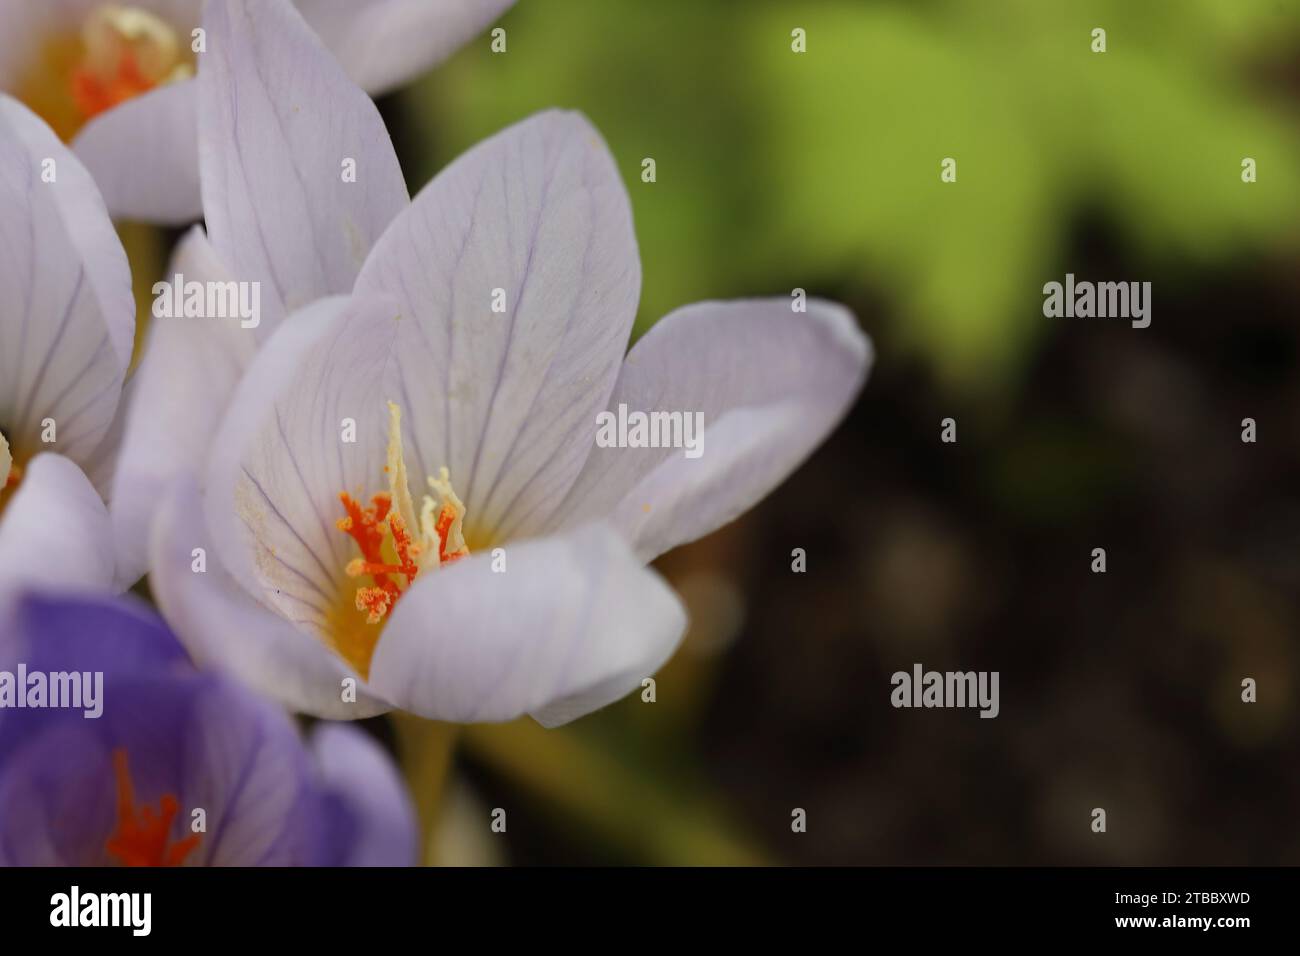 close-up of a white autumn crocus looking into the blossom from above, copy space Stock Photo